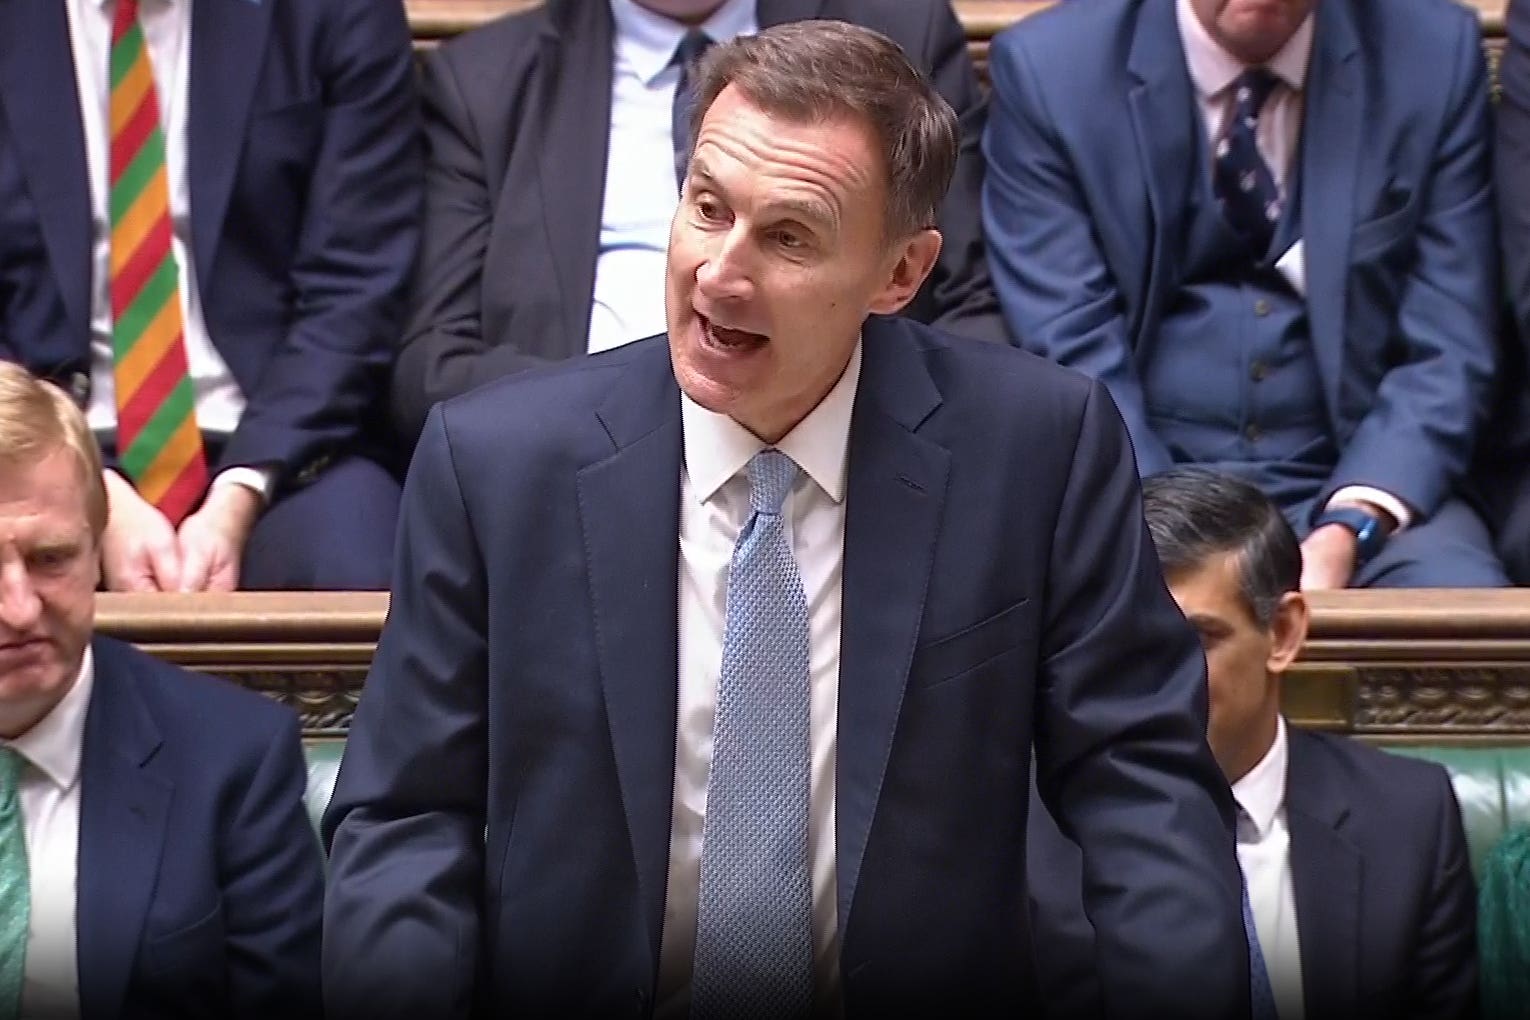 Mr Hunt delivered national insurance tax cuts in his spring budget